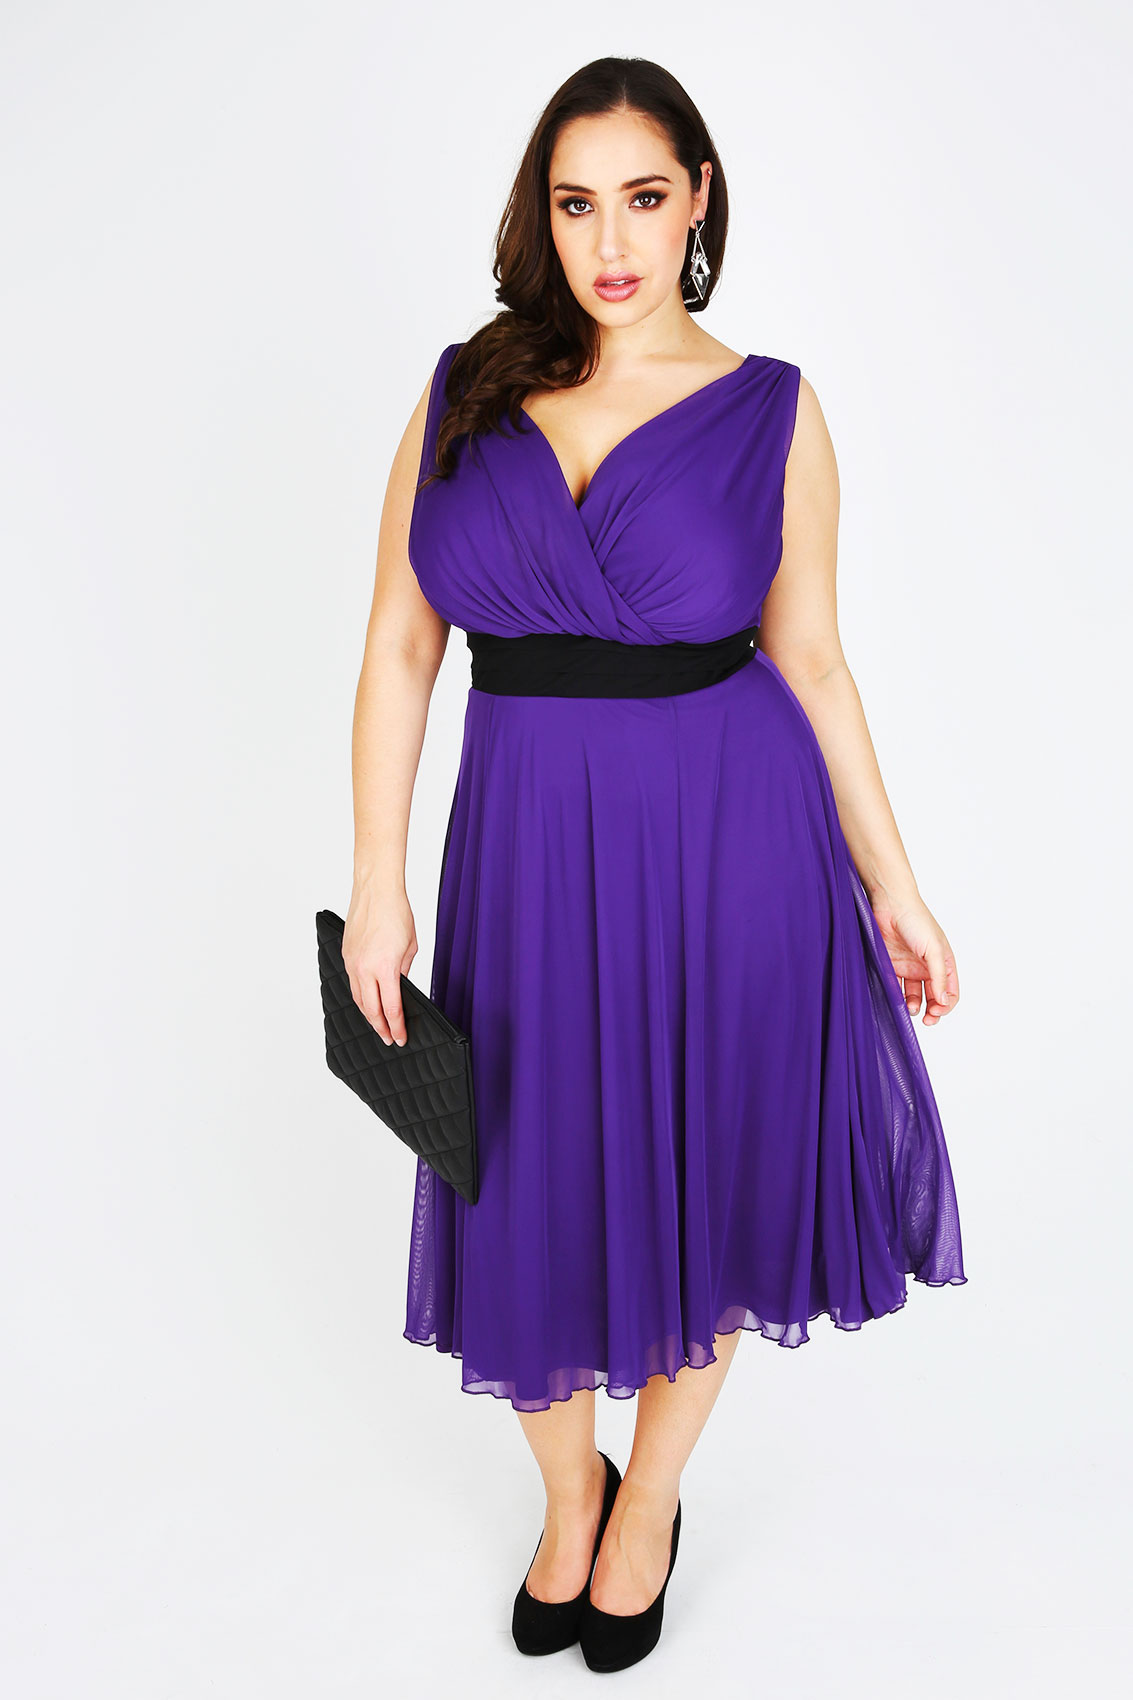 Purple Floaty Prom Dress With Black Ruched Waist Band plus size 14,16 ...